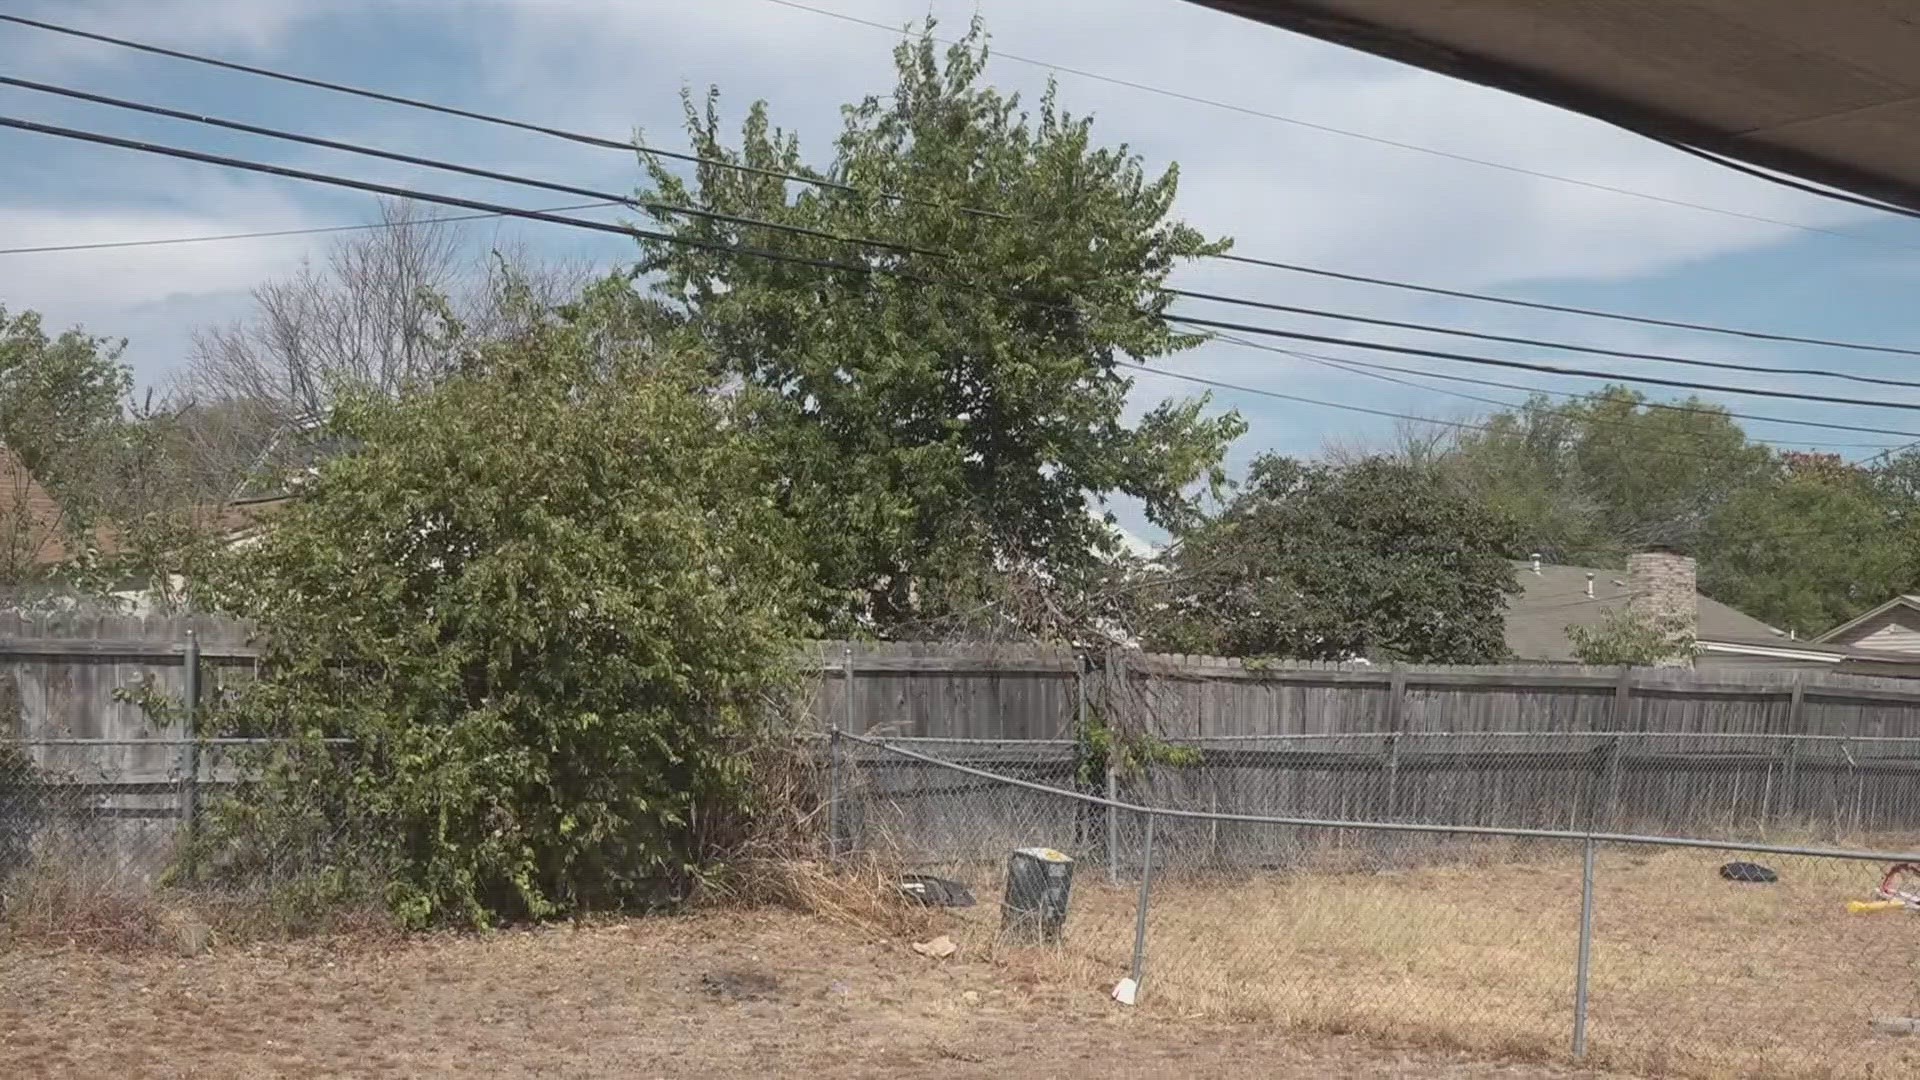 6 Fix takes a look at who is responsible for cutting back tree limbs on power lines in Killeen.